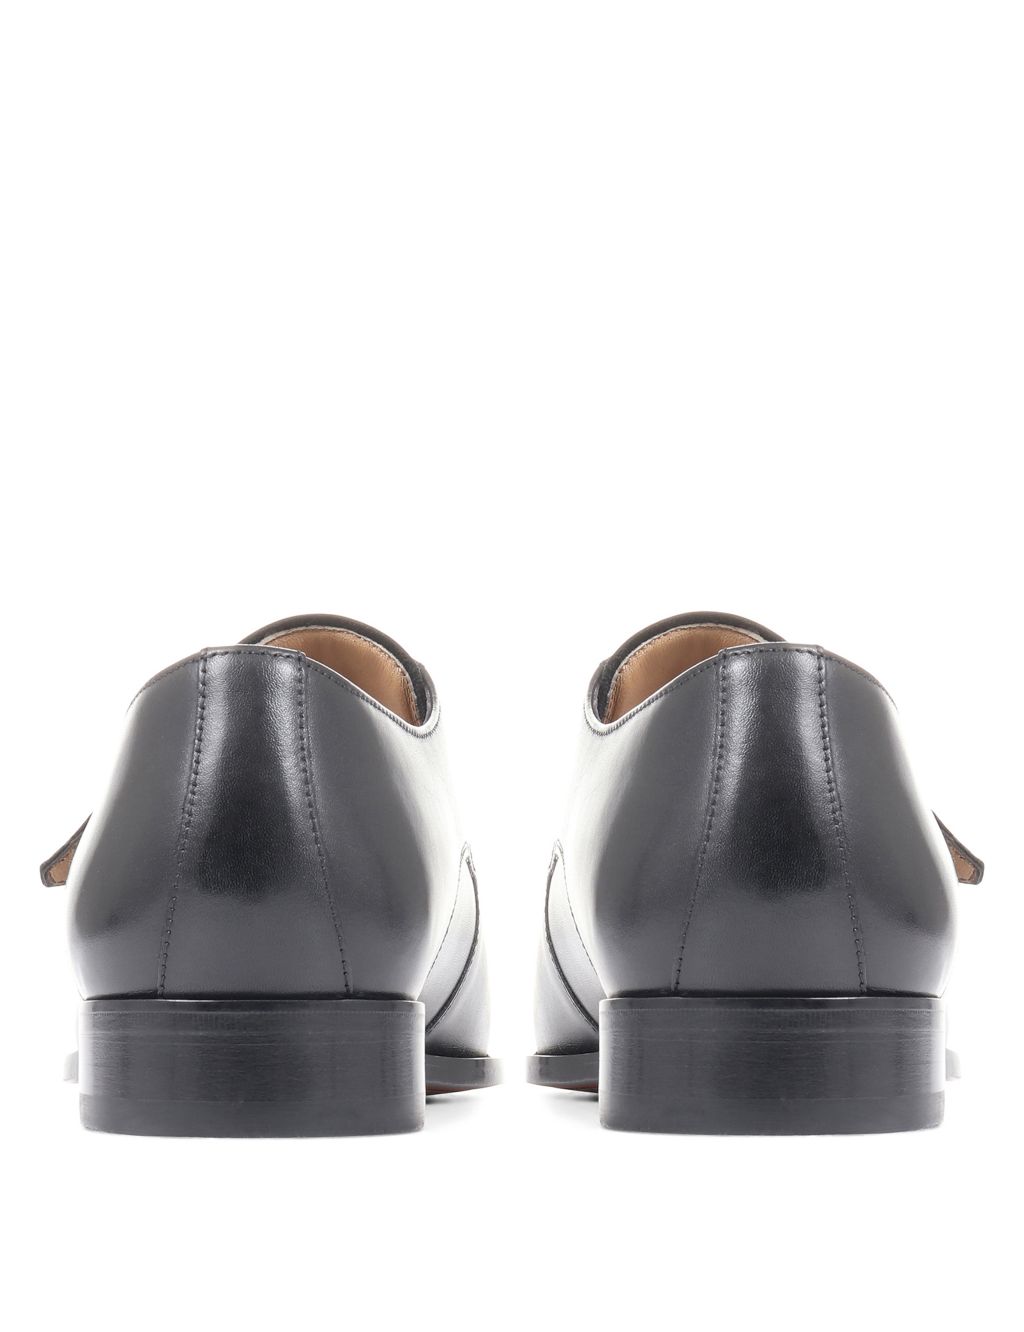 Leather Monk Strap Shoes image 3